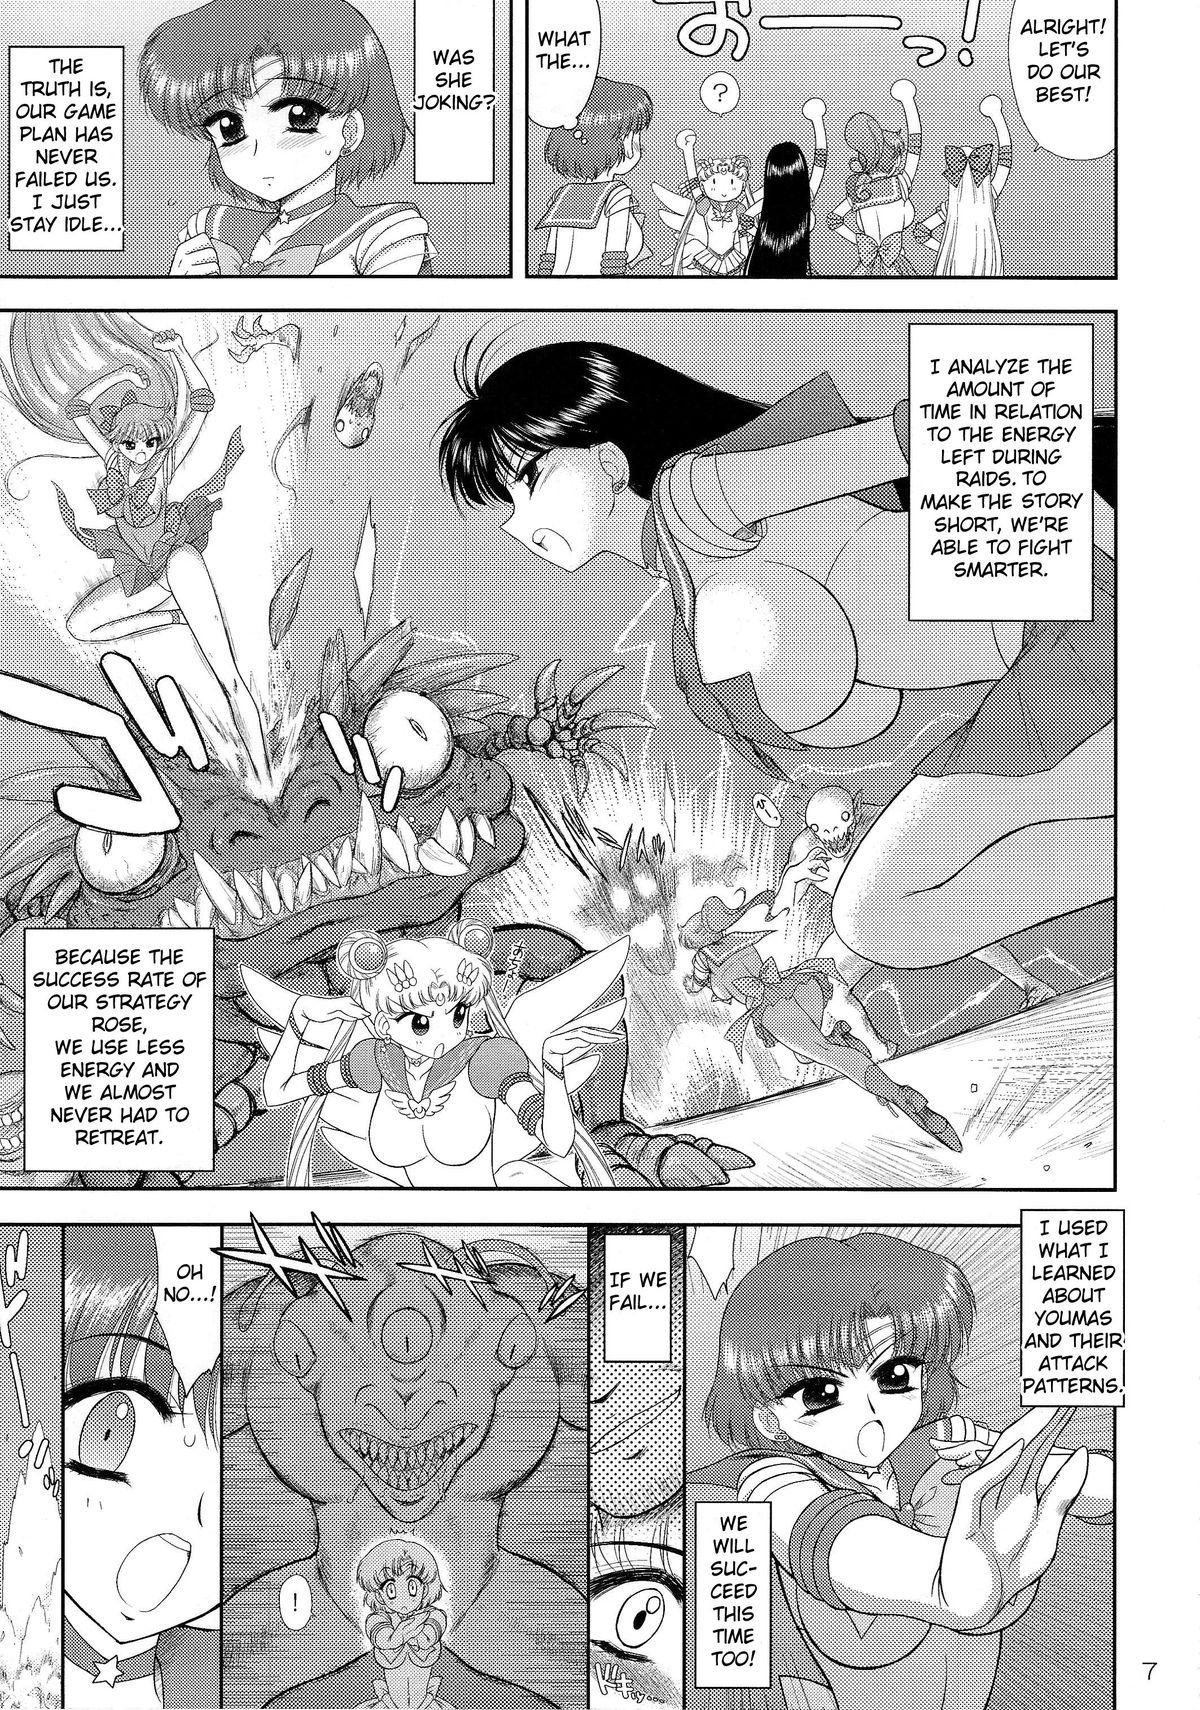 Real Orgasms MADE IN HEAVEN - Sailor moon Shemale Sex - Page 6